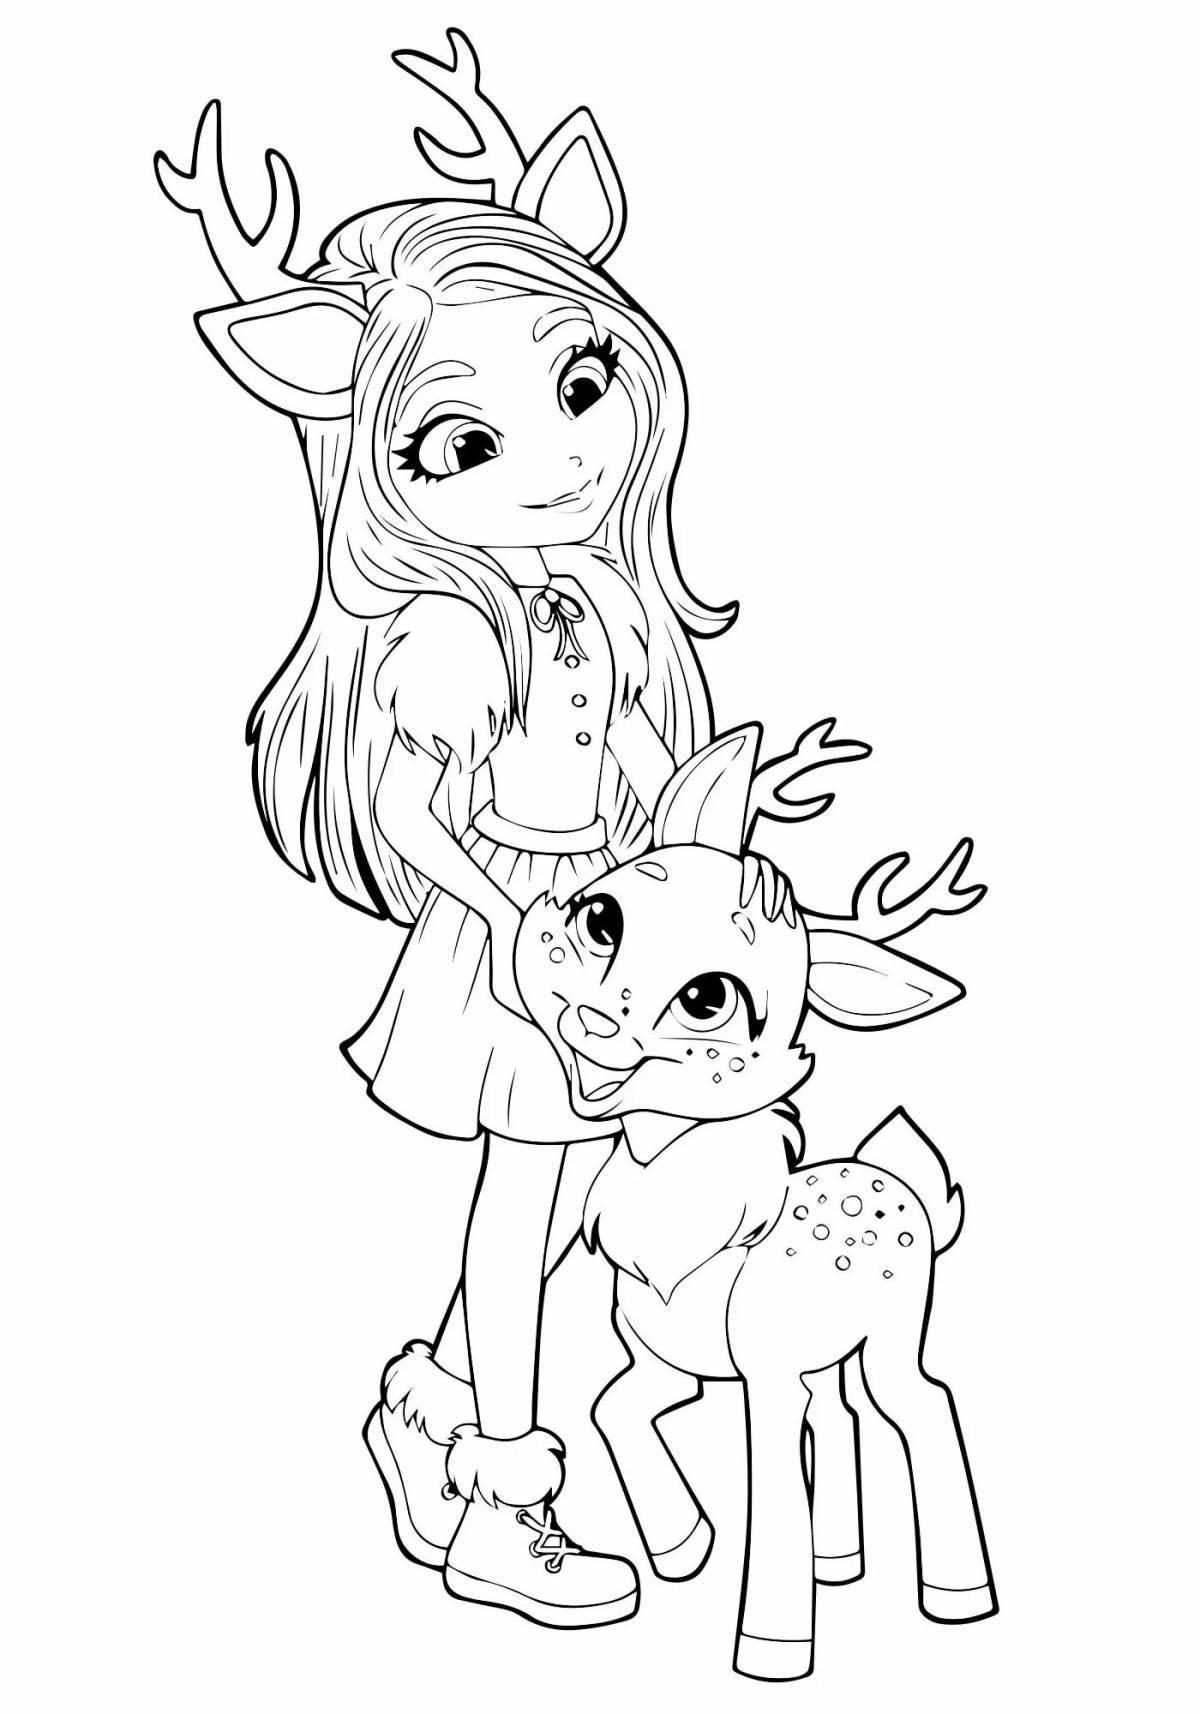 Inchanchymus coloring page